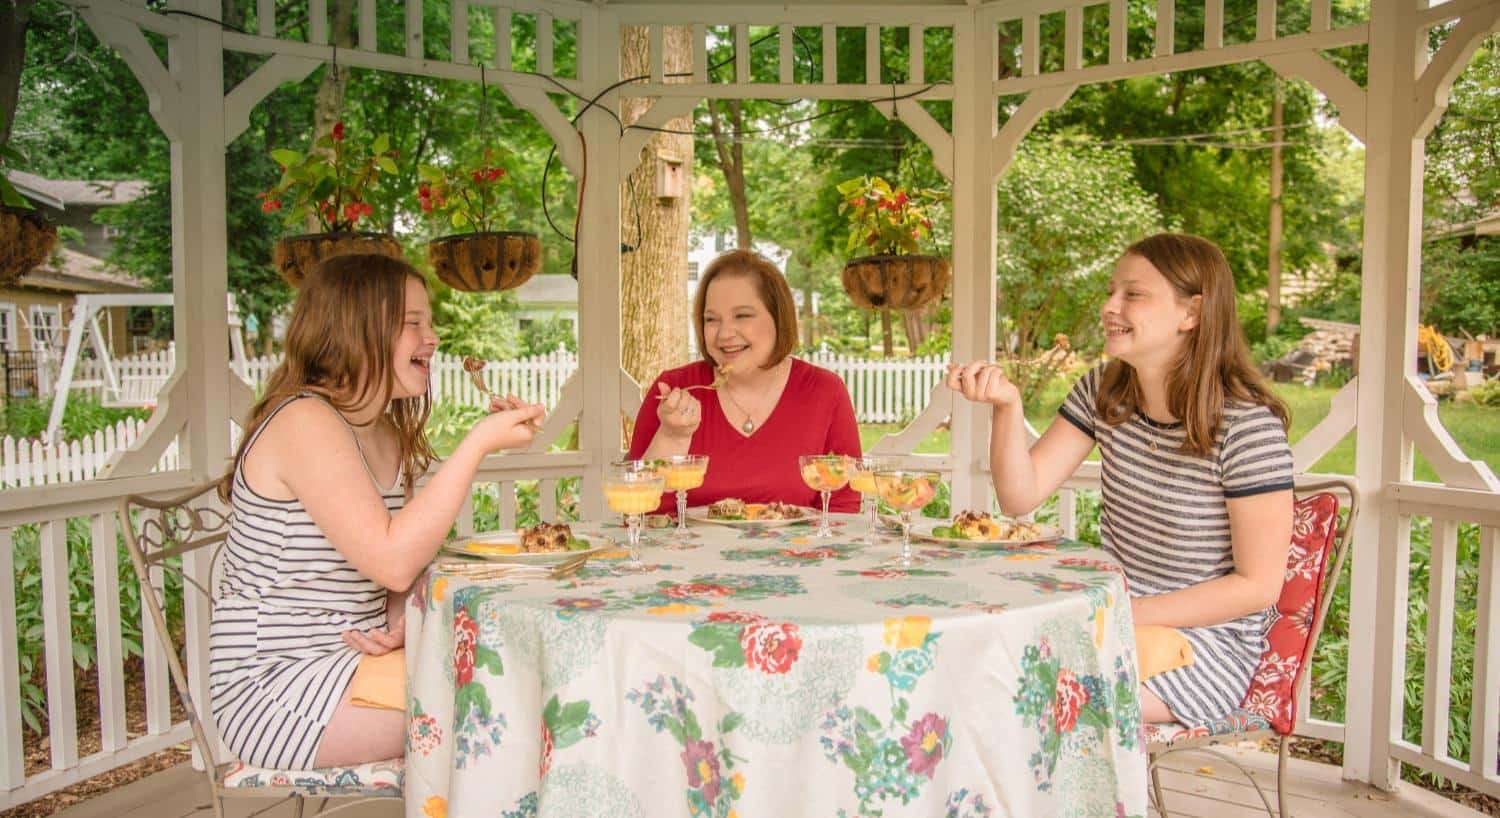 Lady and two girls sitting at a table under a gazeebo eating, smiling and laughing